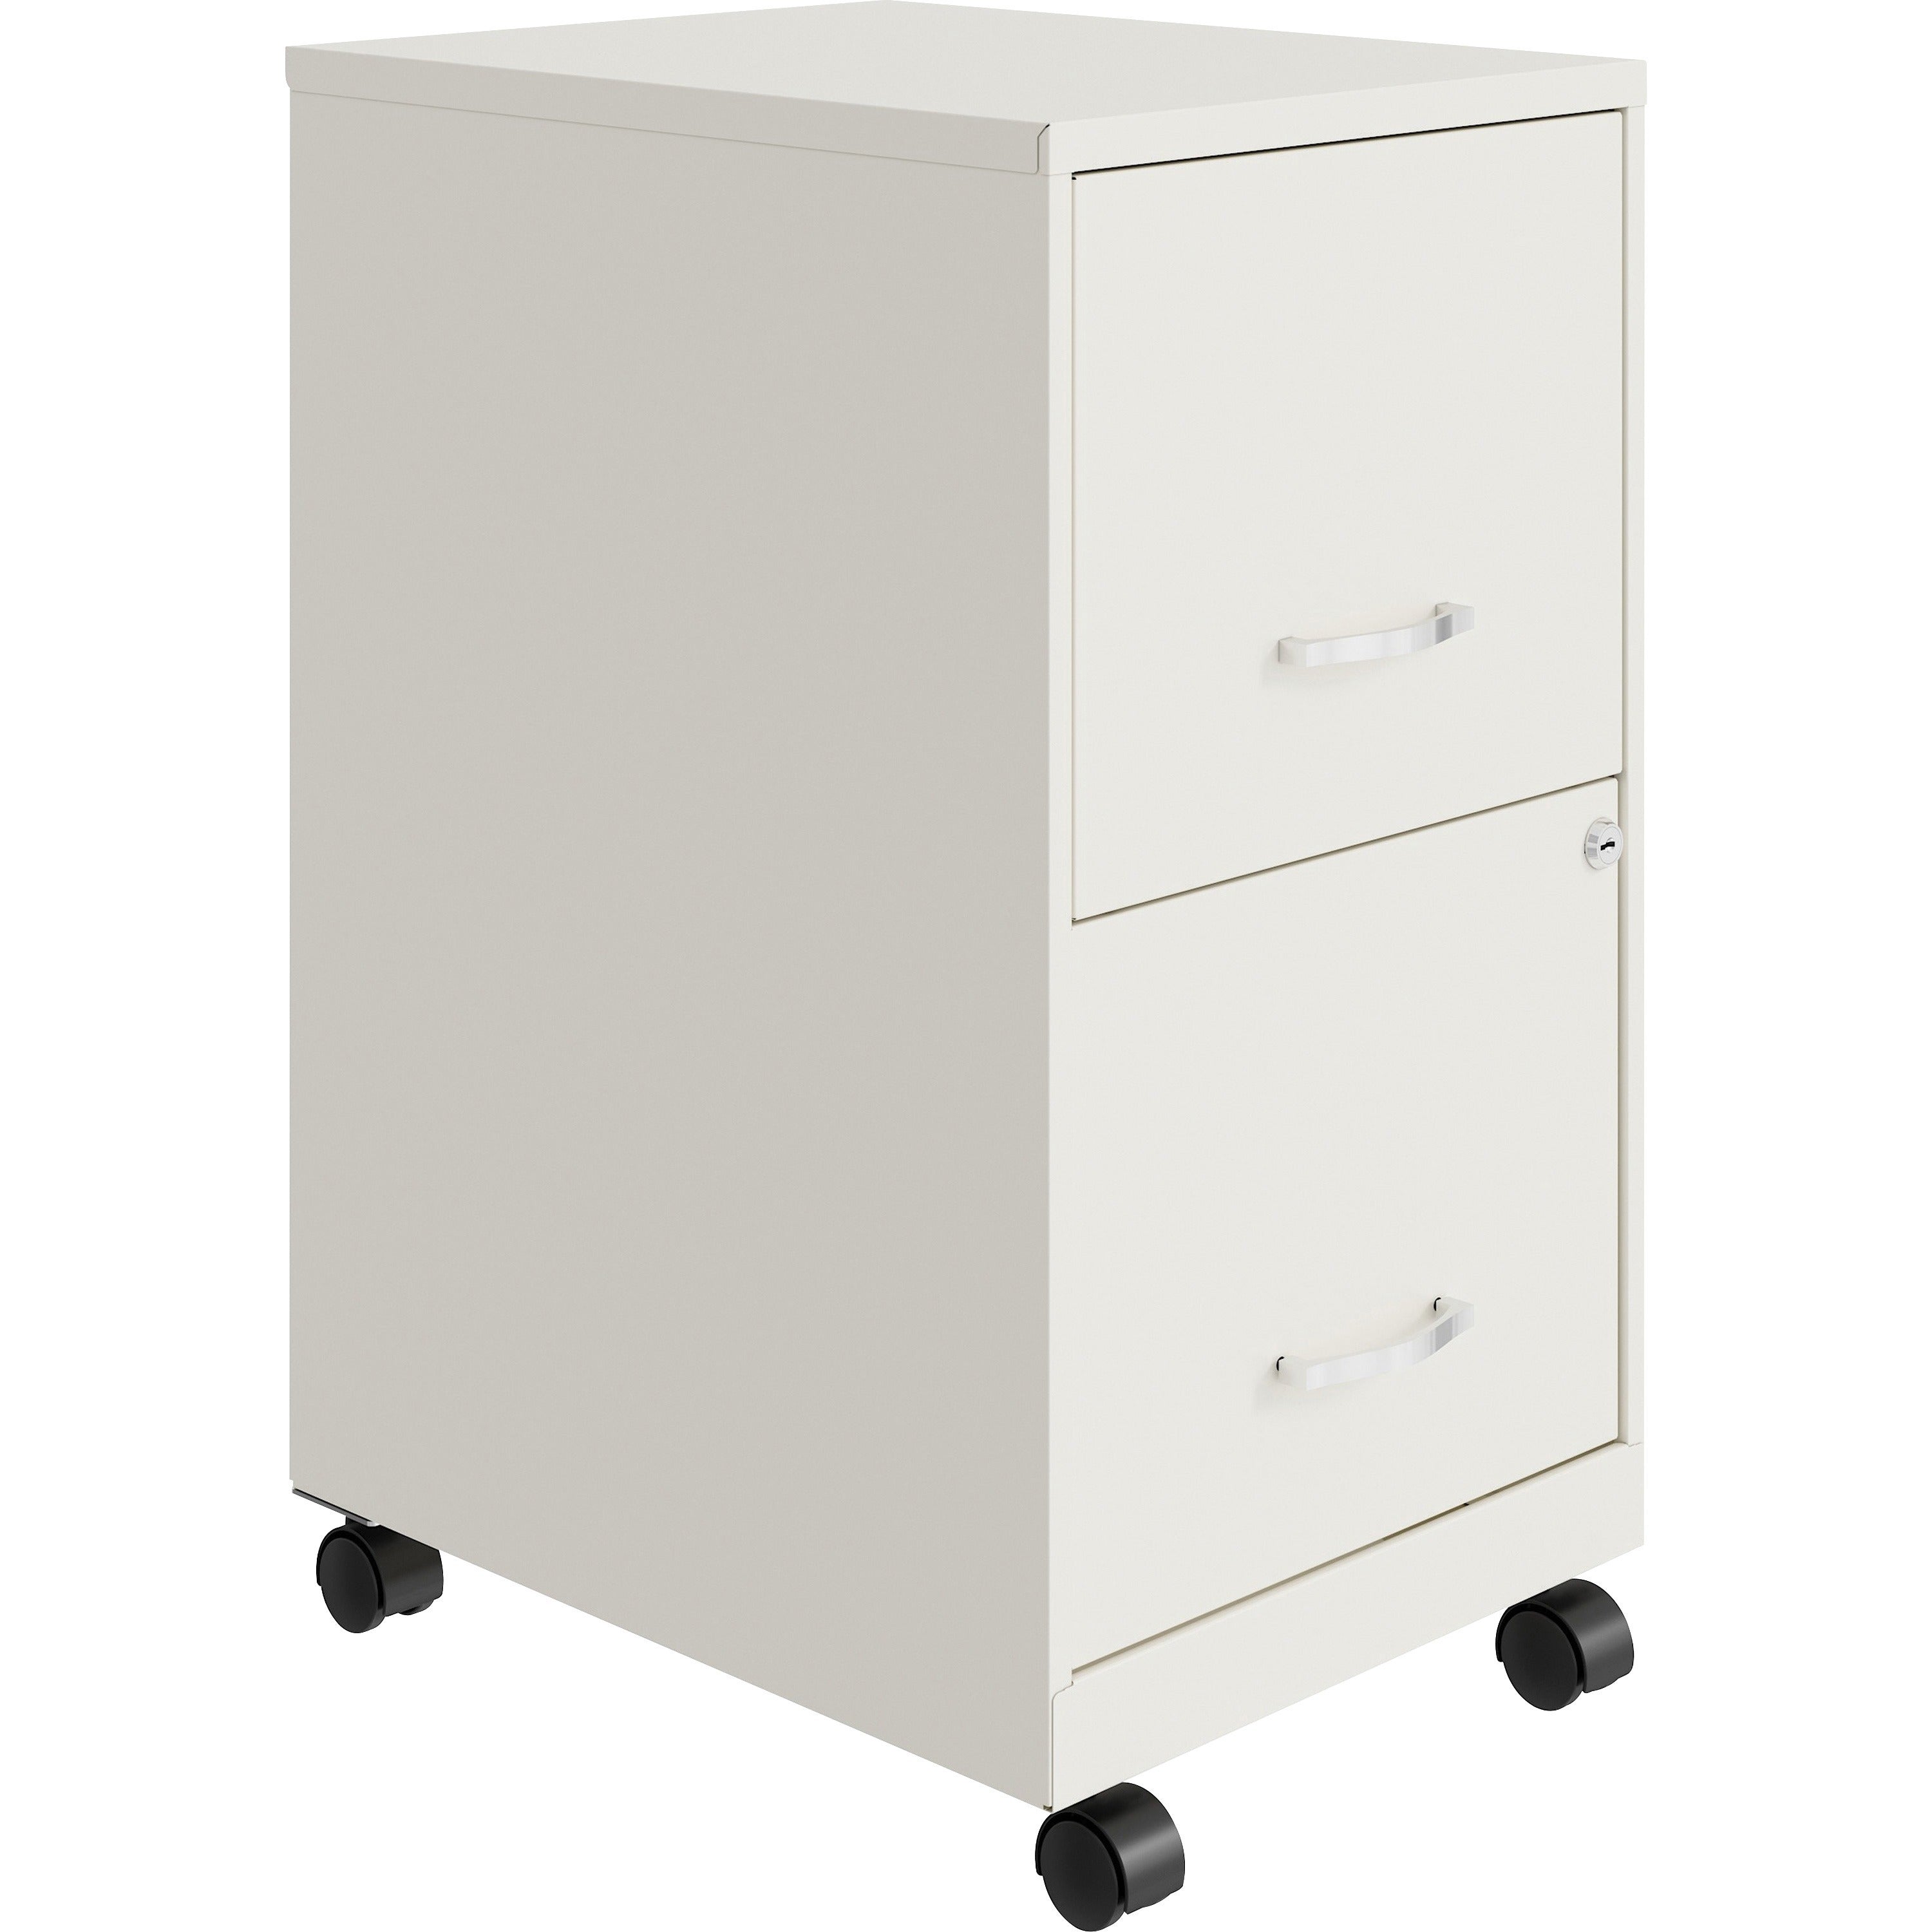 nusparc-mobile-file-cabinet-142-x-18-x-265-for-file-letter-mobility-locking-drawer-glide-suspension-3-4-drawer-extension-cam-lock-nonporous-surface-white-painted-steel-steel-recycled-assembly-required_nprvf218amwe - 1